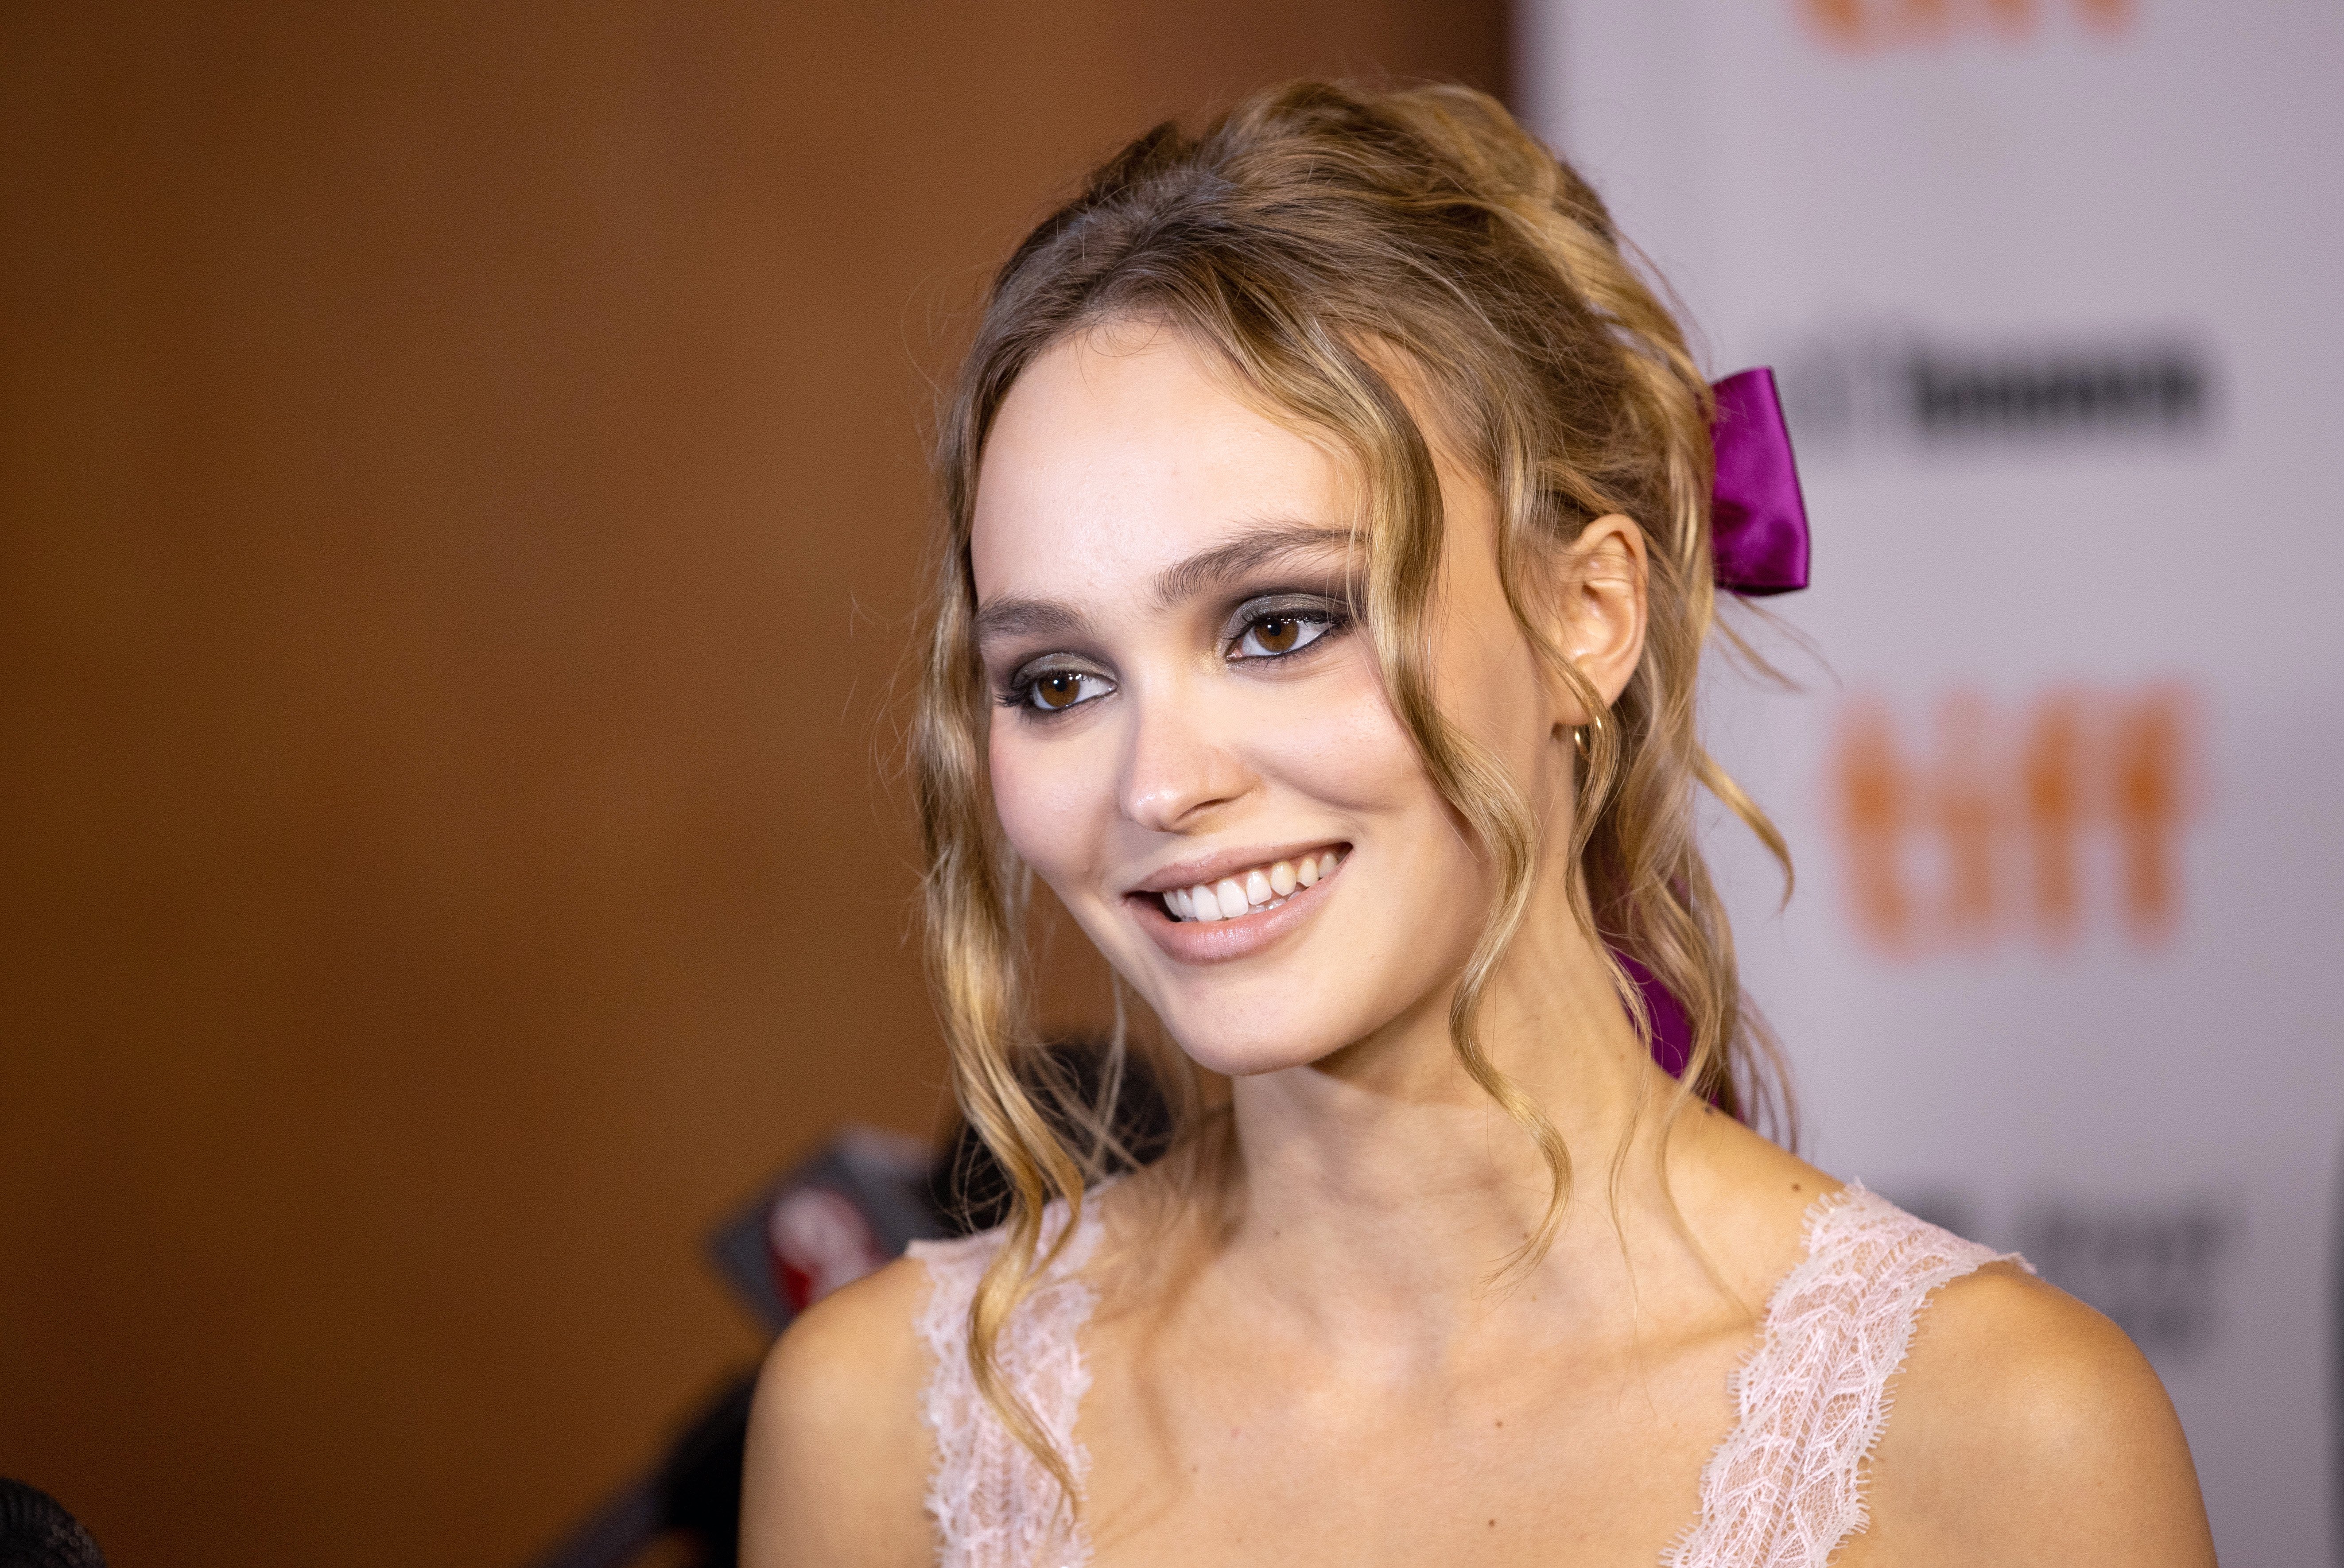 Lily-Rose Depp photographed at the "Wolf" premiere during the 2021 Toronto International Film Festival at Princess of Wales Theatre on September 17, 2021 in Toronto, Ontario. / Source: Getty Images